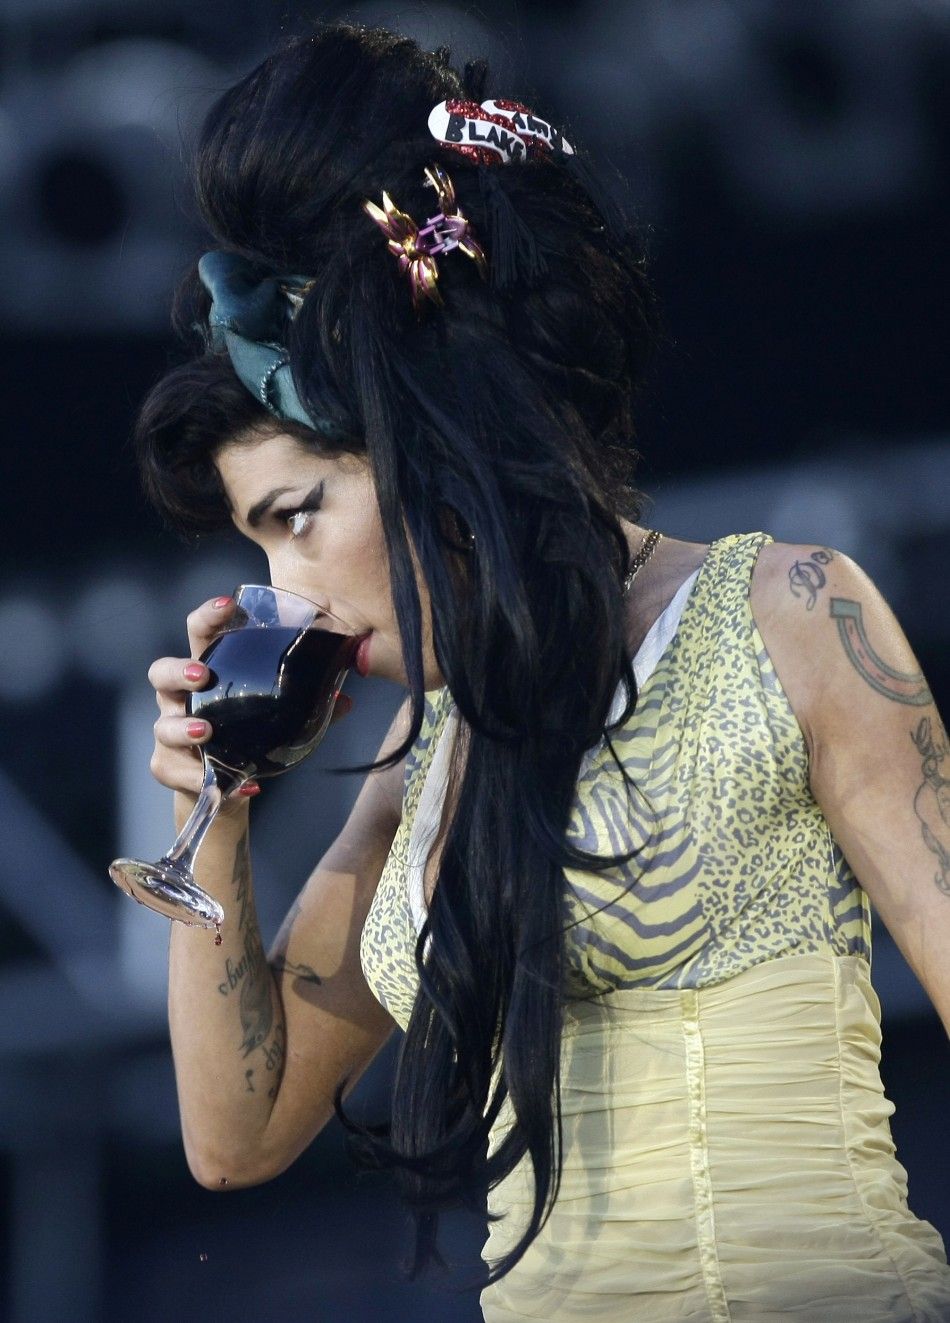 Winehouse drinking her 8th glass of wine onstage